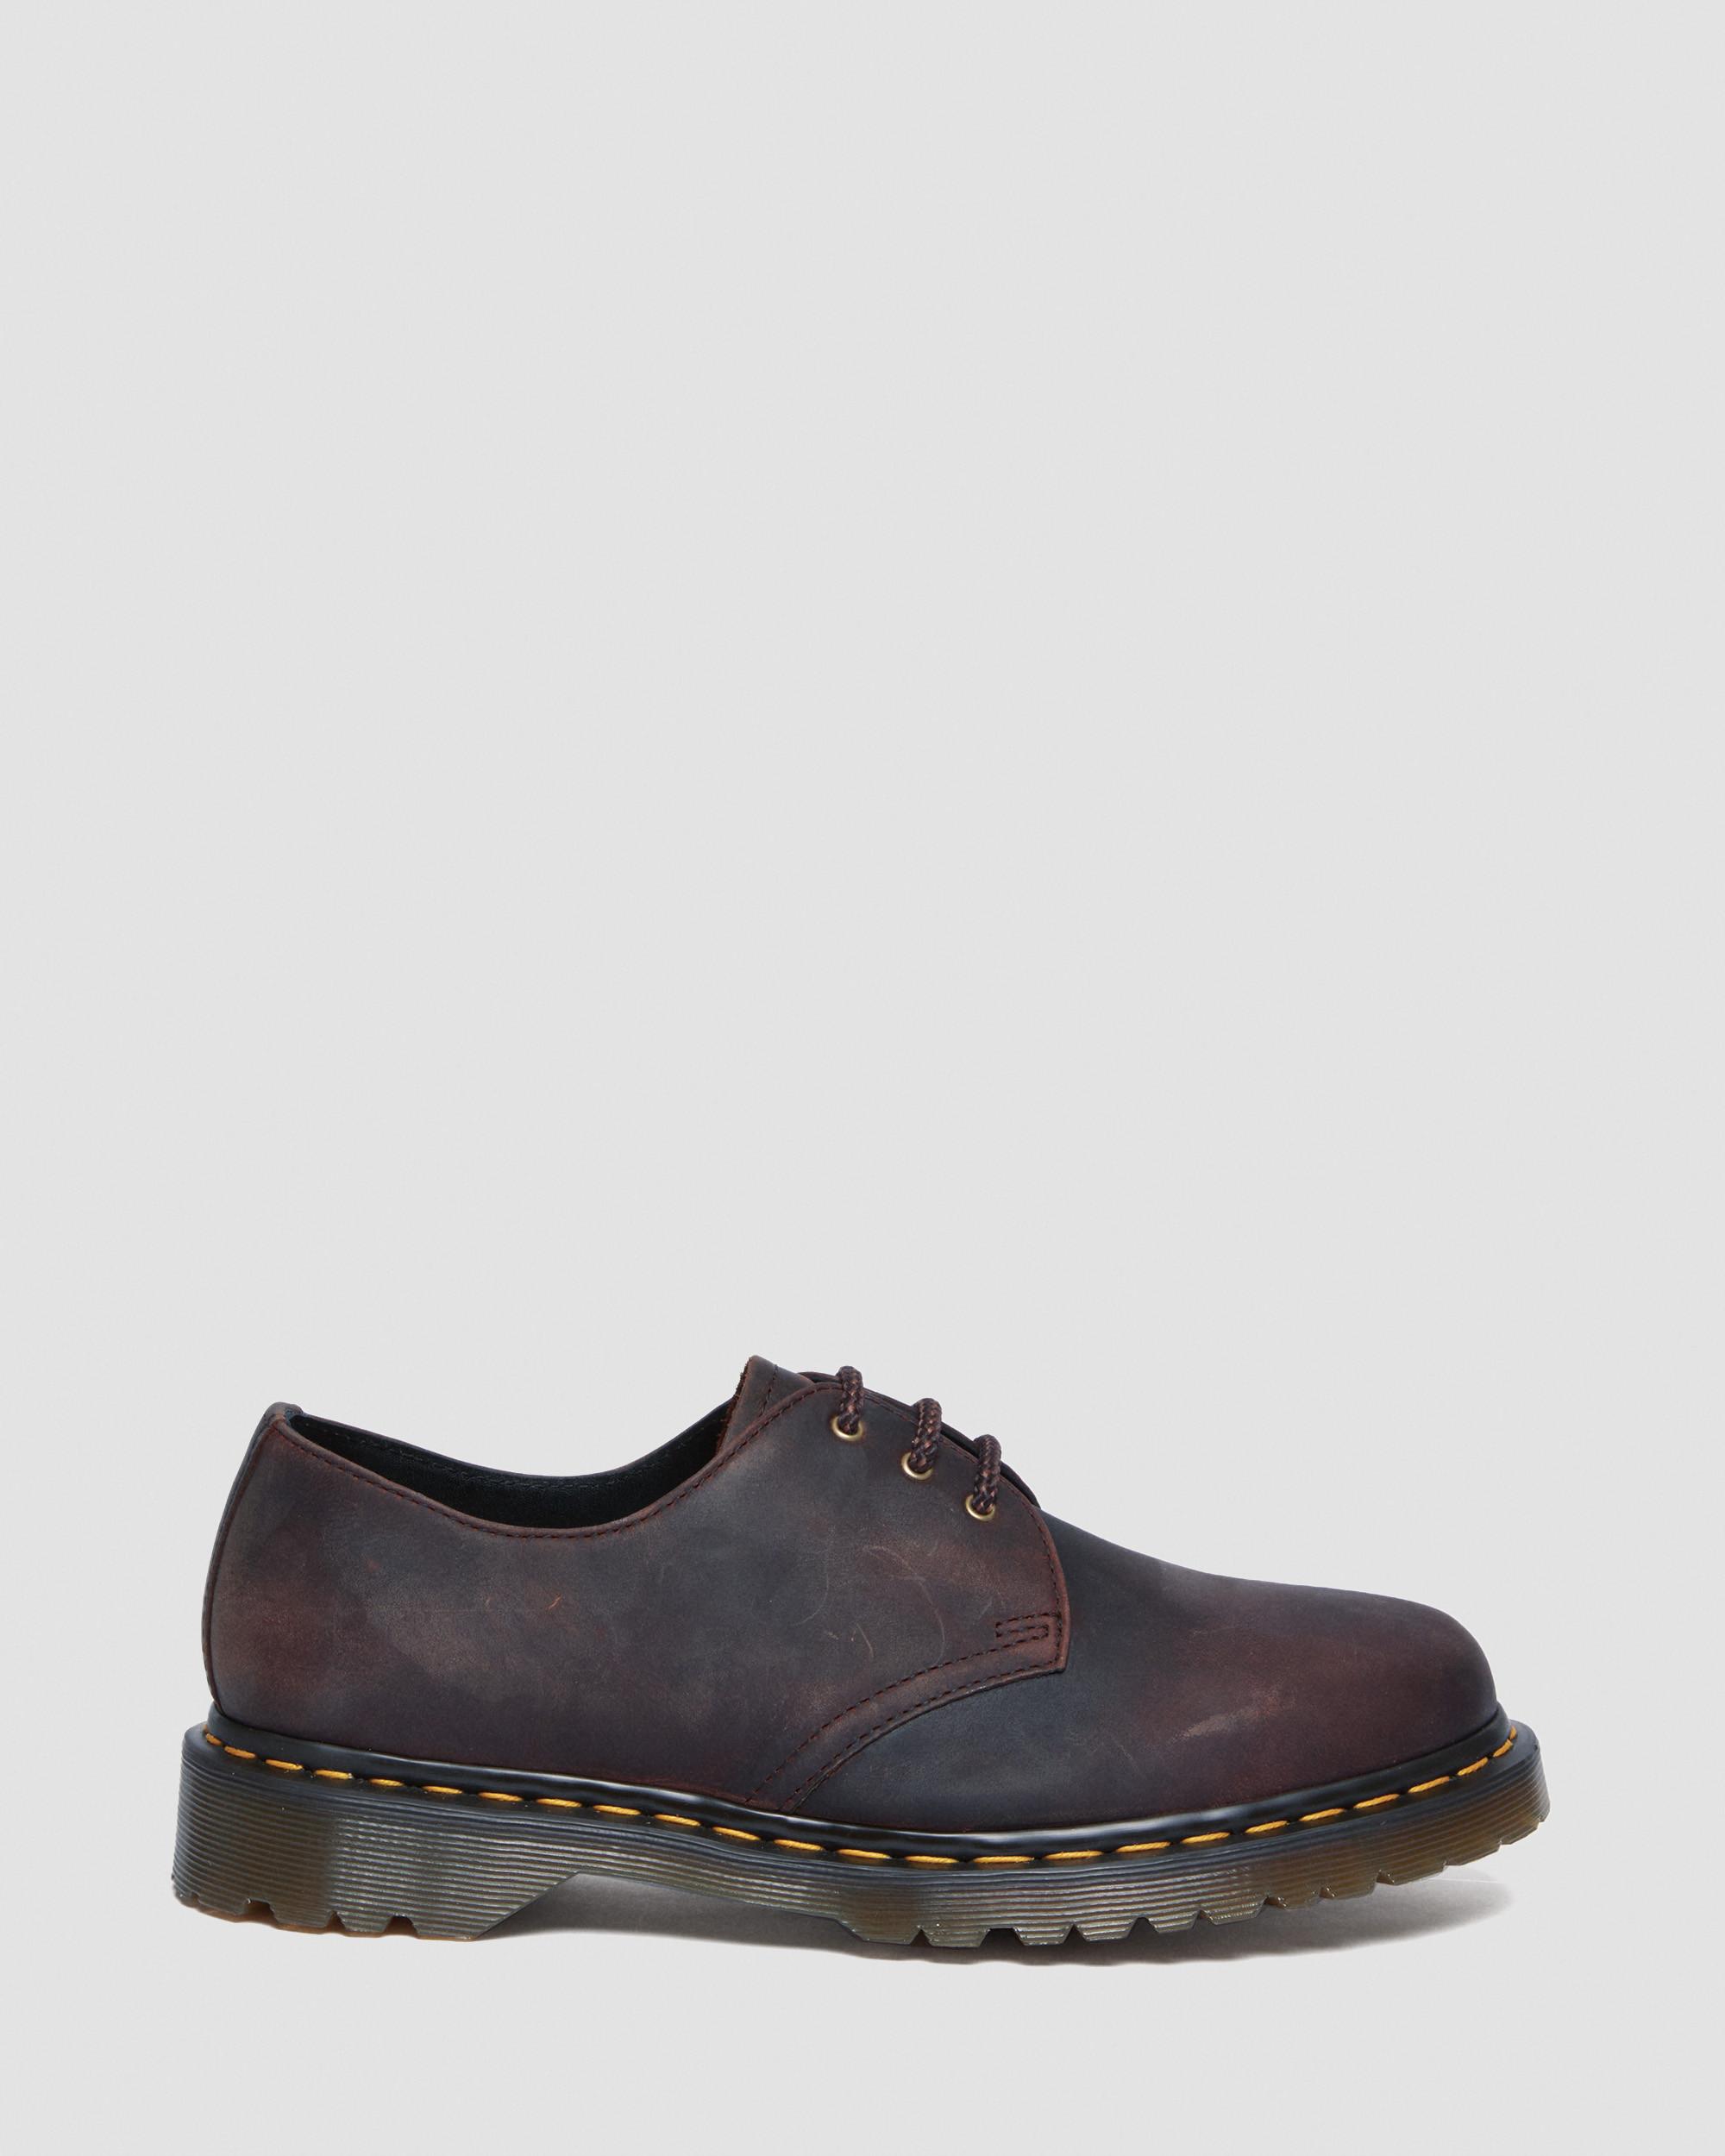 1461 Waxed Full Grain Leather Oxford Shoes in Chestnut | Dr. Martens